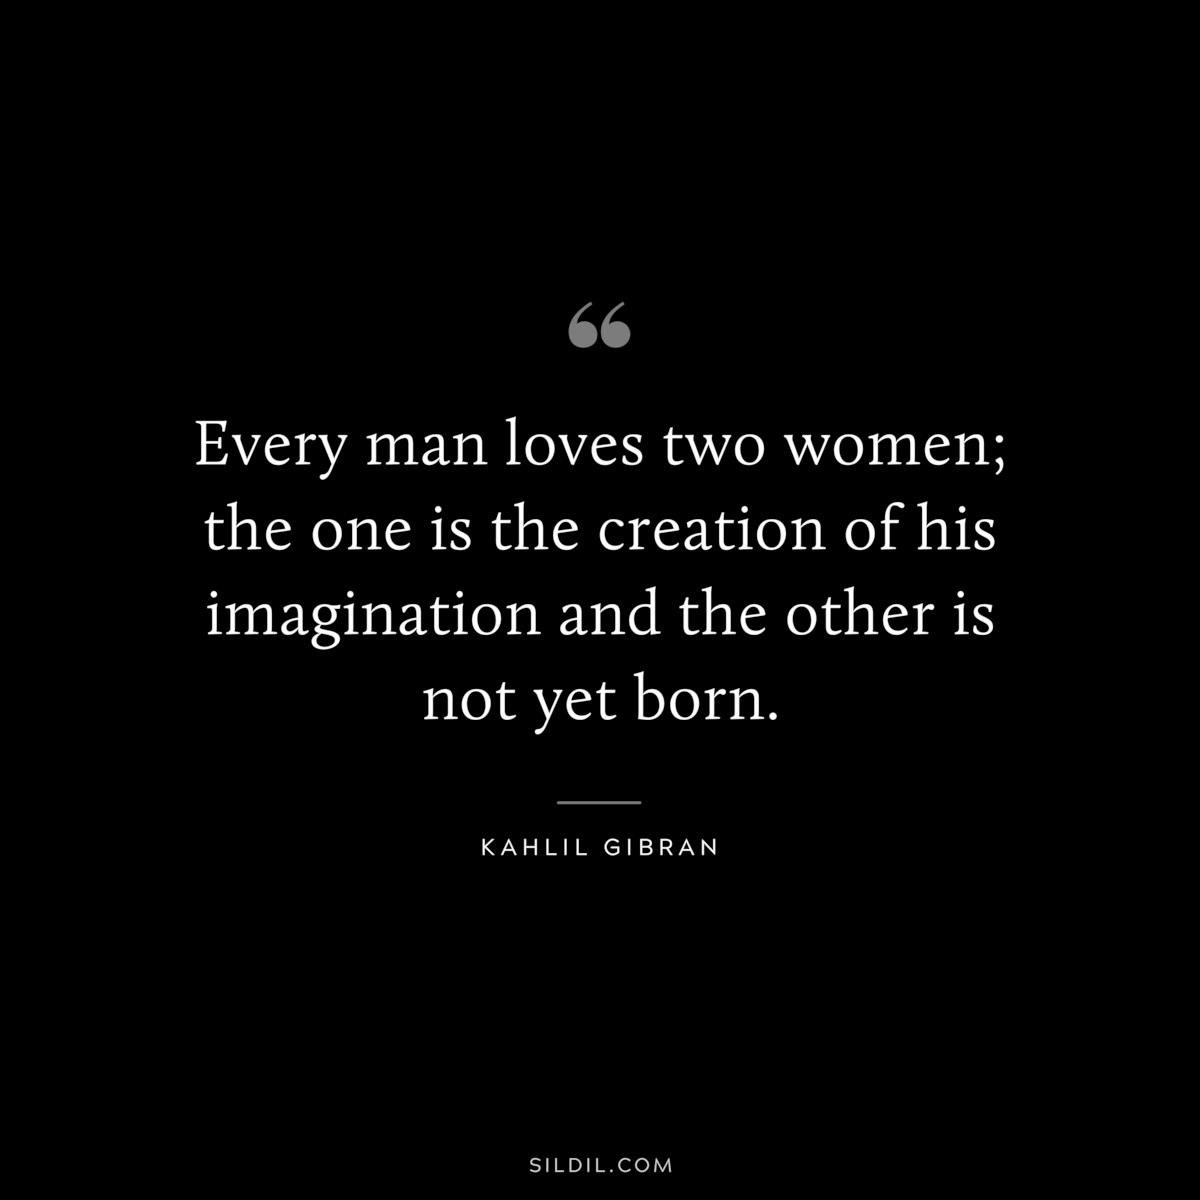 Every man loves two women; the one is the creation of his imagination and the other is not yet born. ― Kahlil Gibran